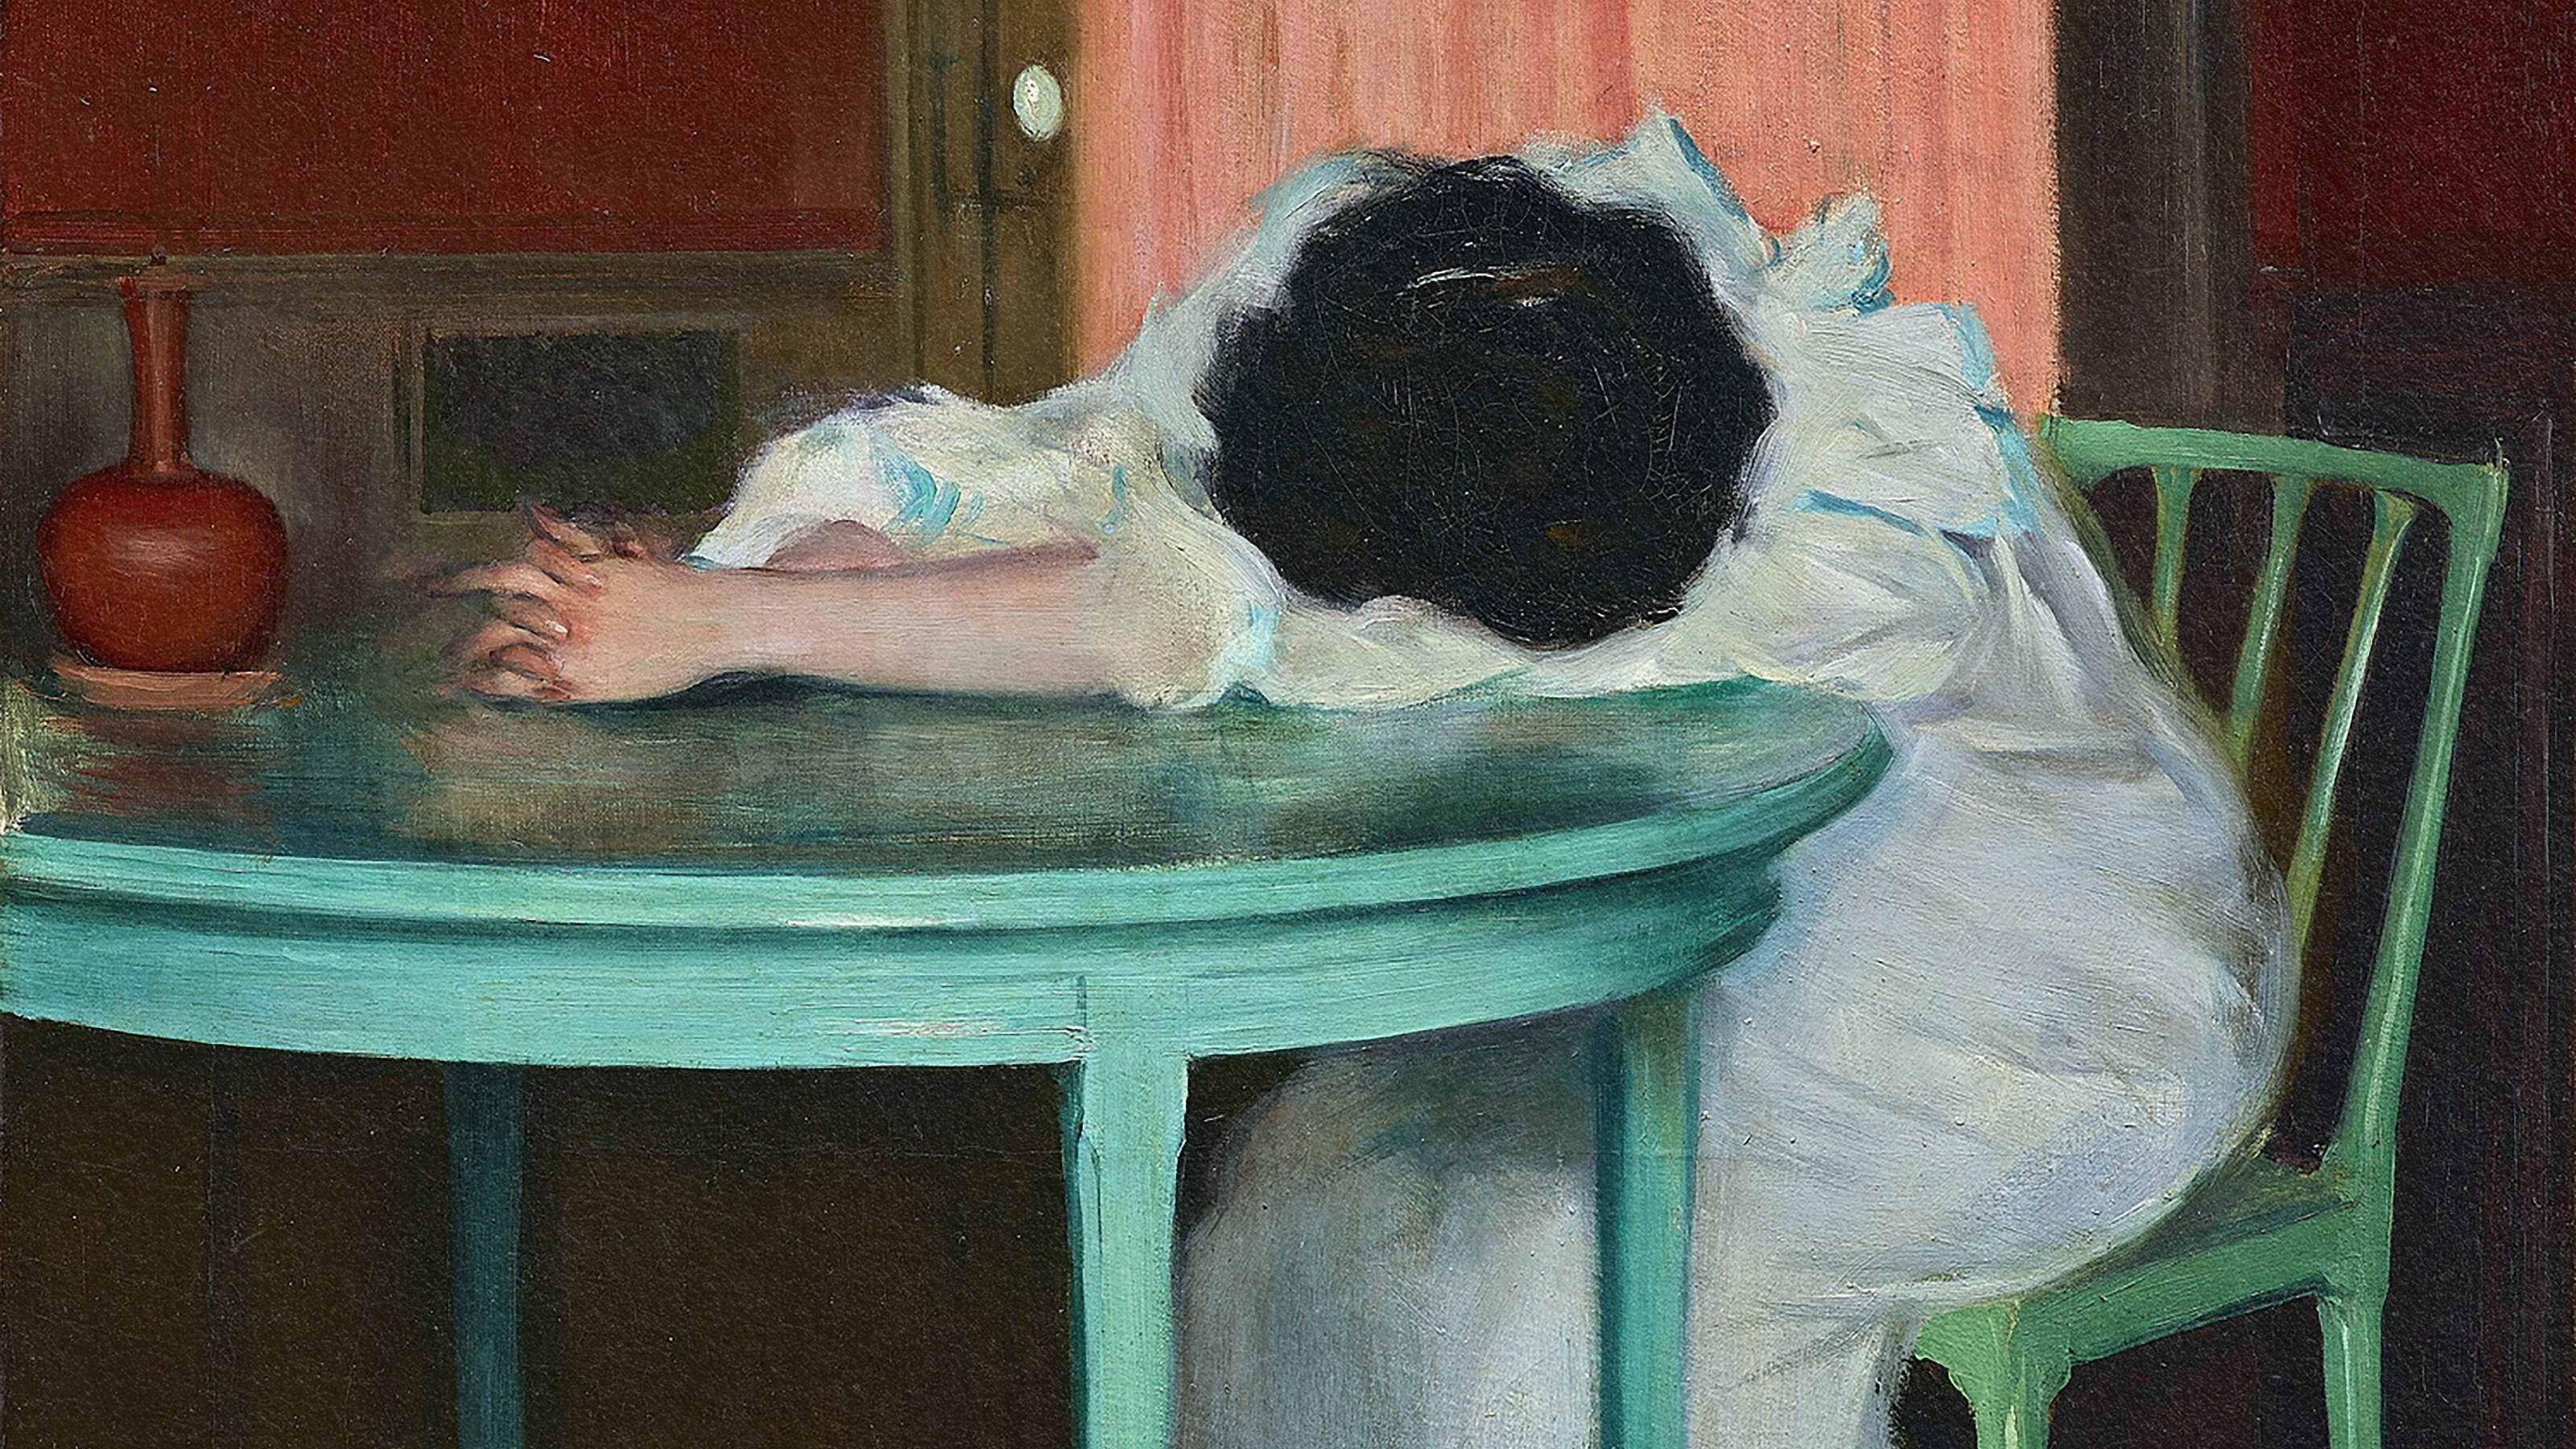 A painting depicting sleep deprivation and a woman asleep at a table.